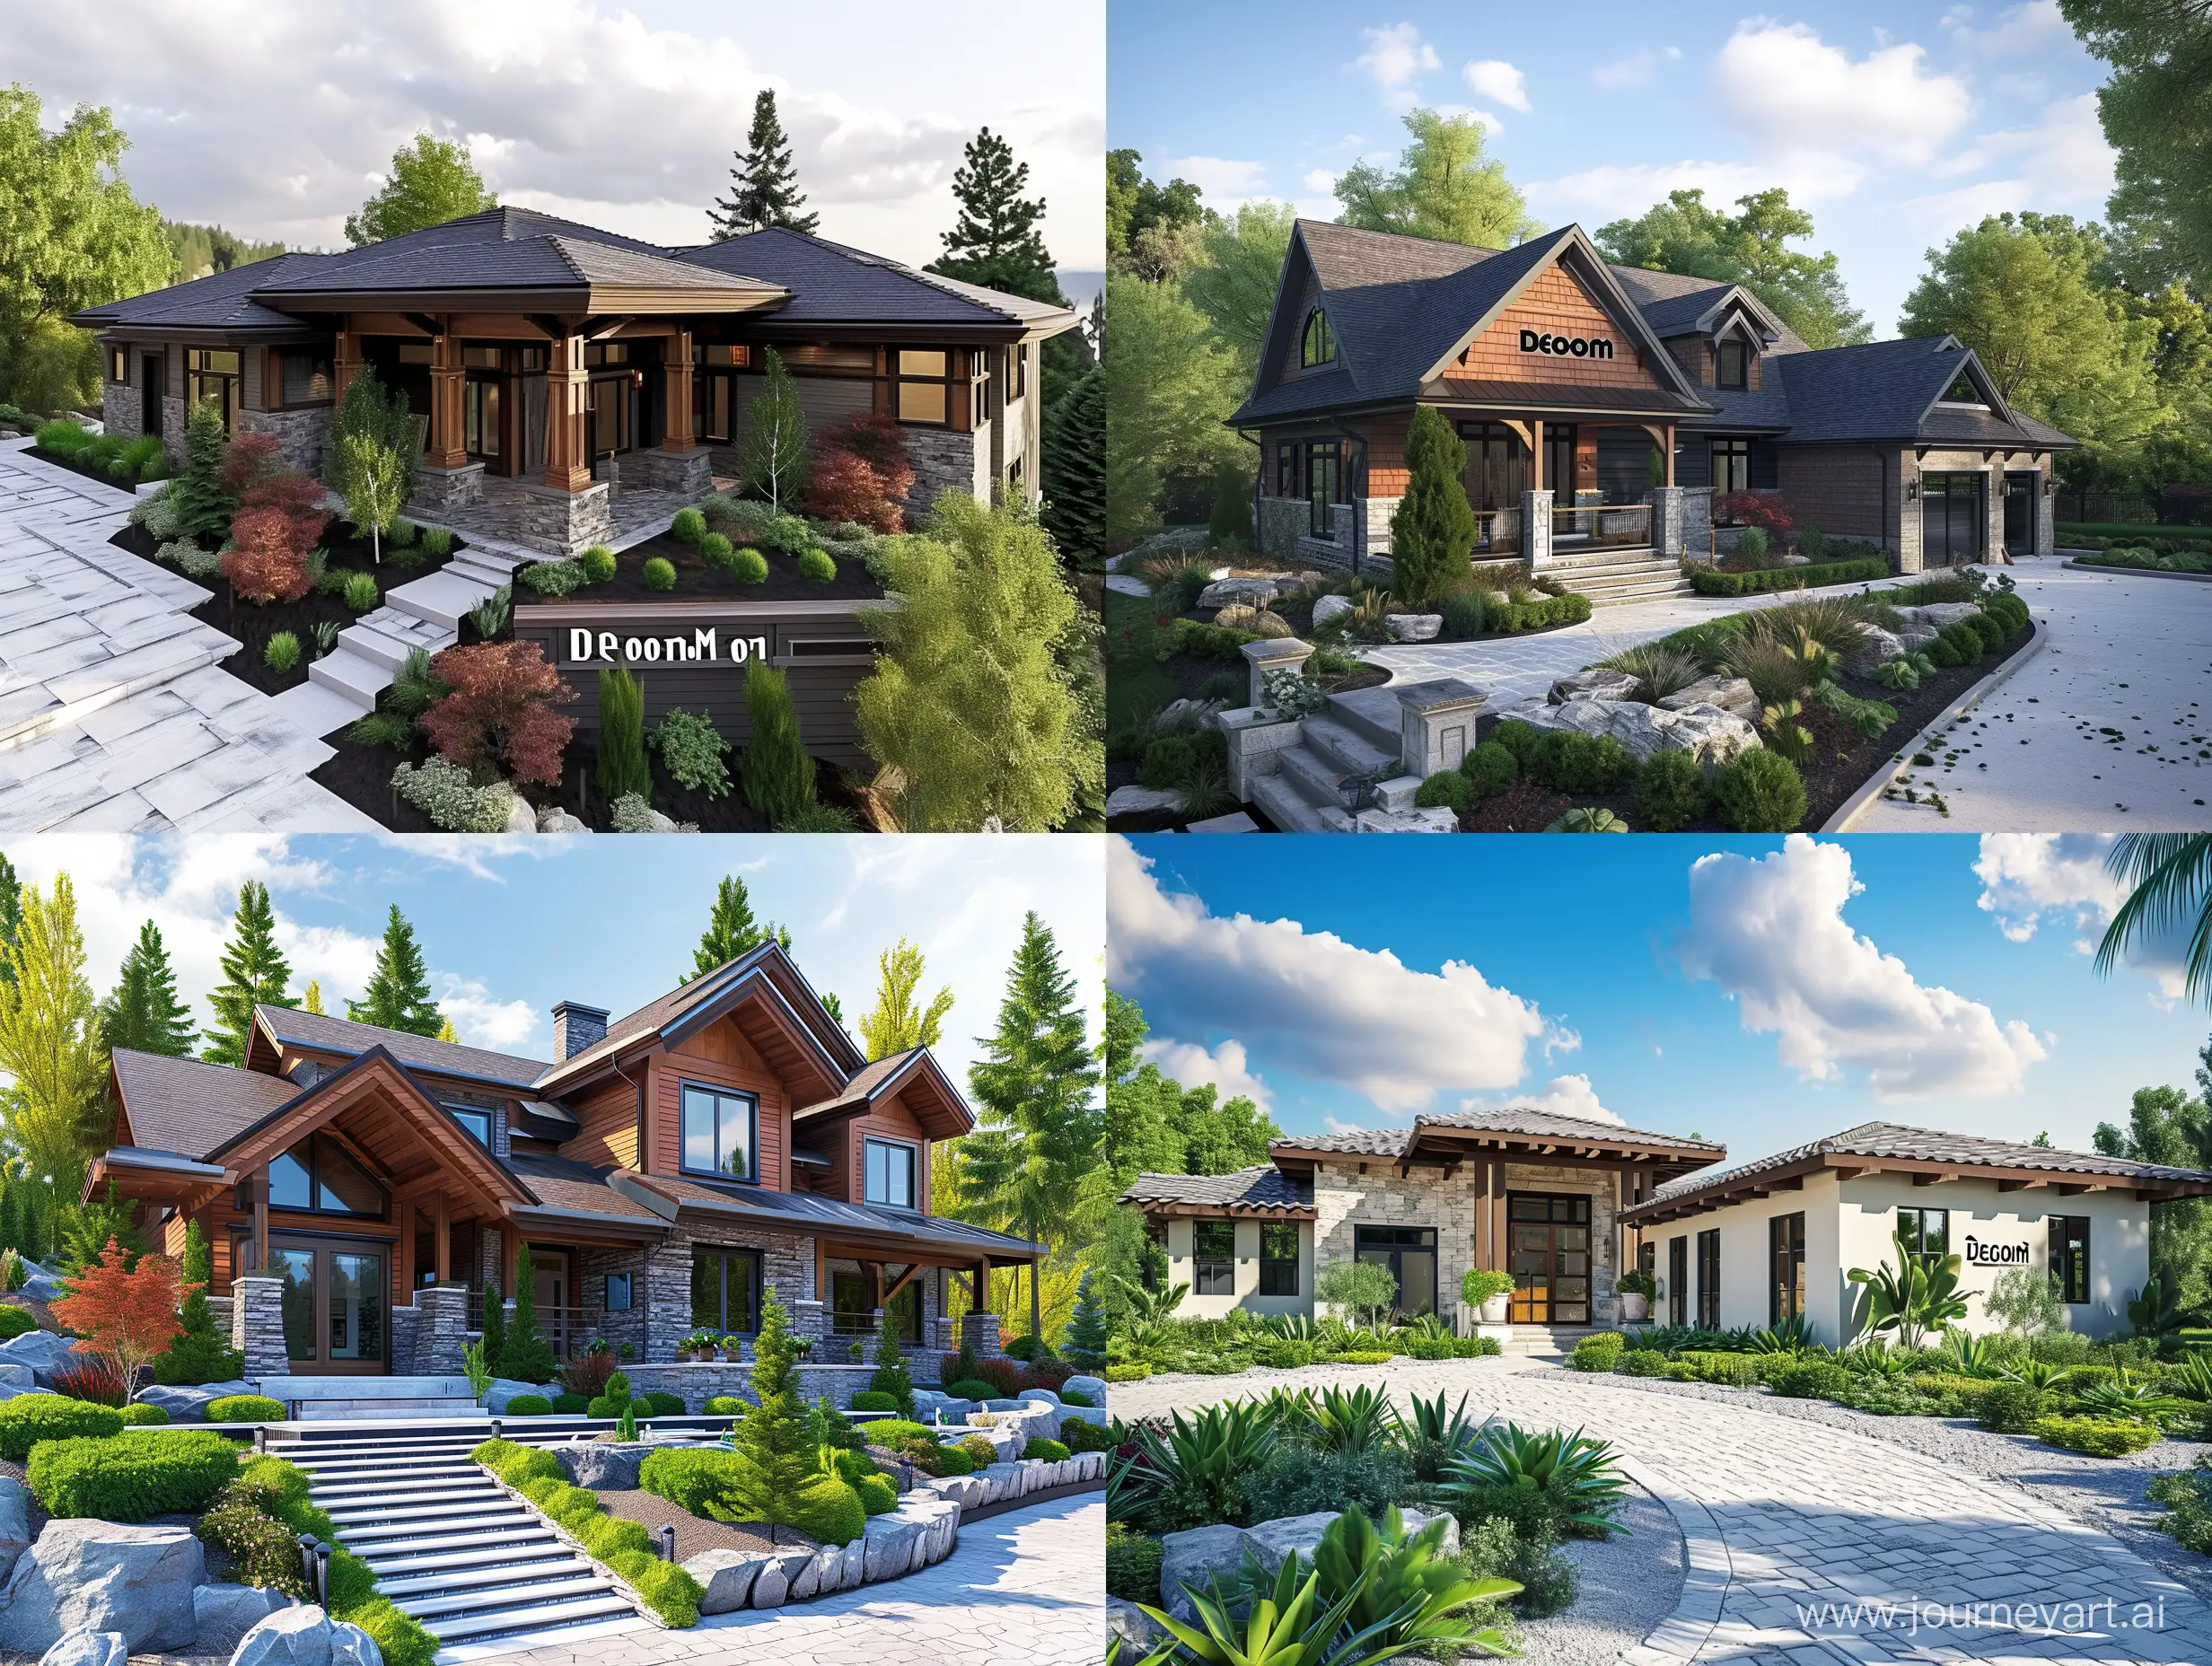 Exquisite-Decom-Construction-House-with-Beautiful-Roof-and-Landscaping